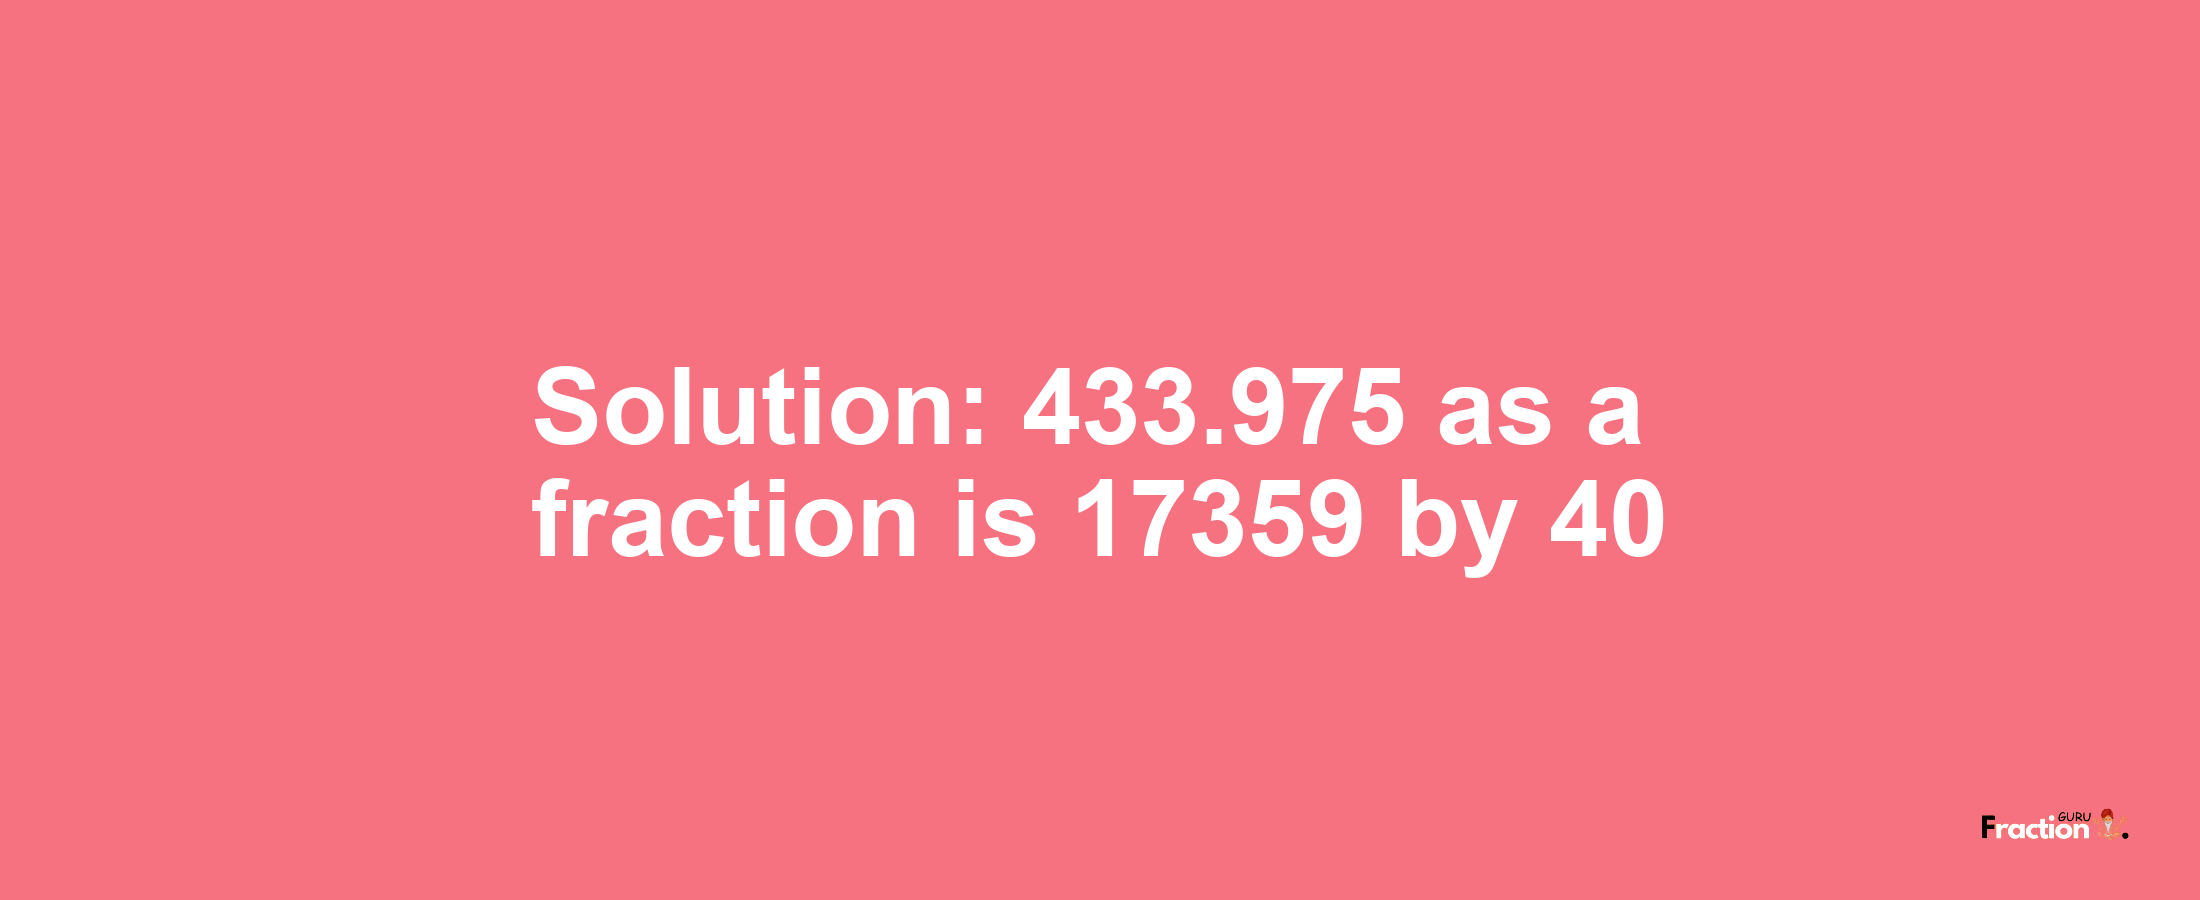 Solution:433.975 as a fraction is 17359/40